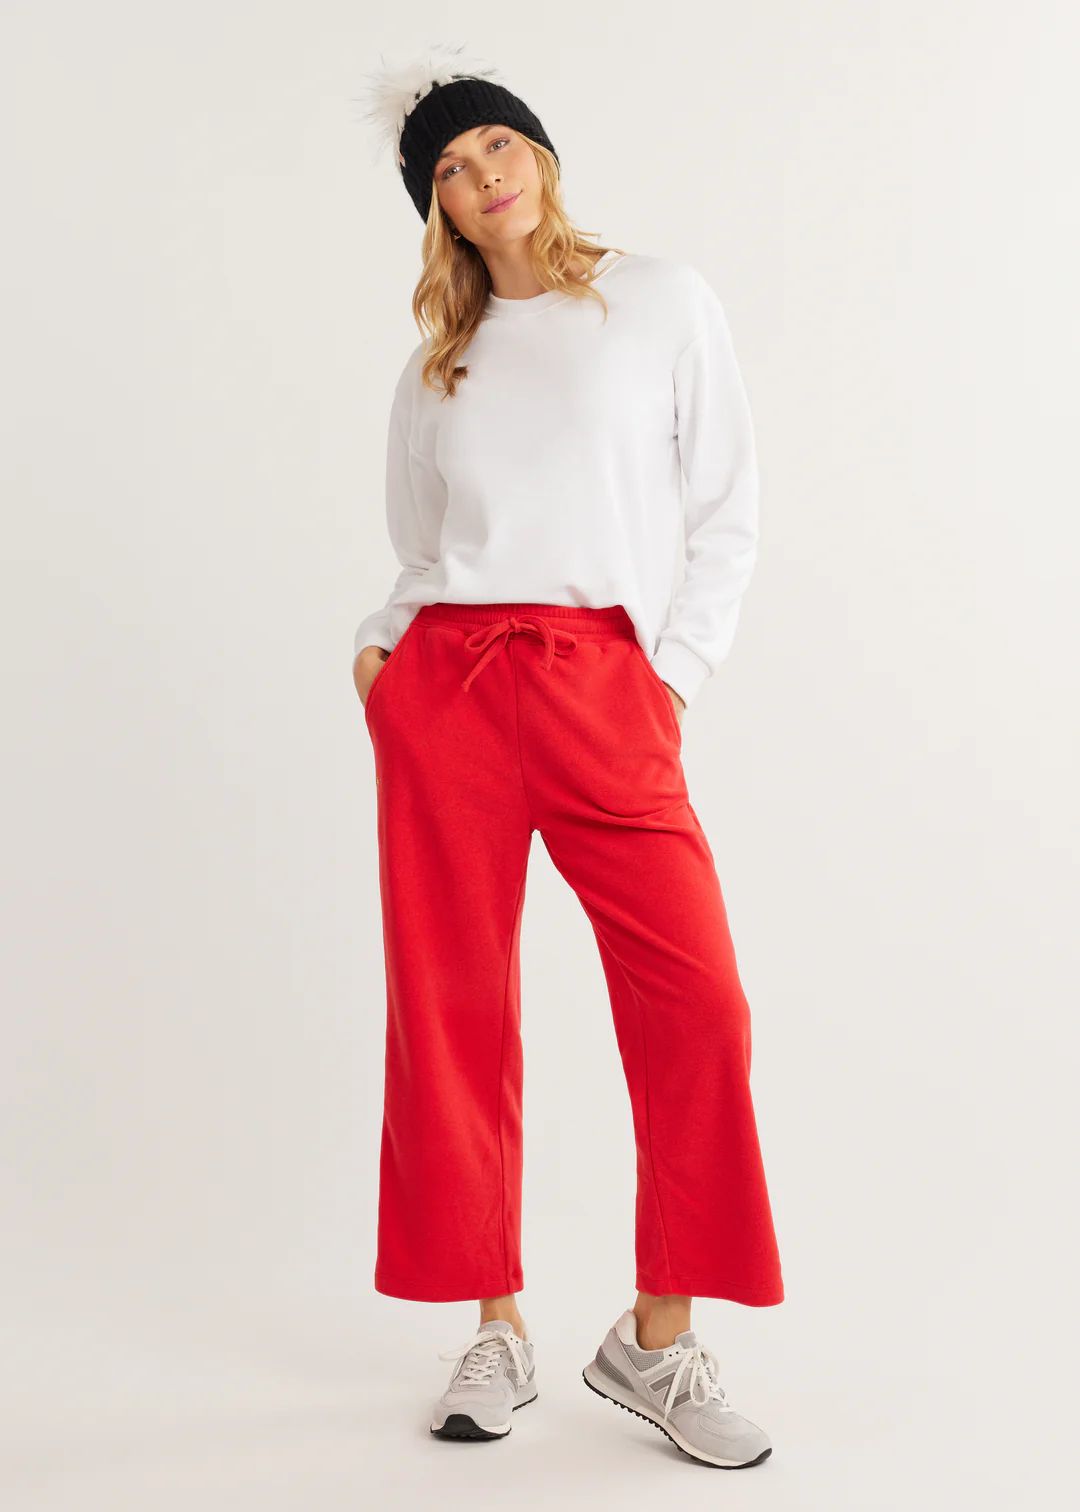 Chateau Lounge Pant in Terry Fleece (Red) | Dudley Stephens